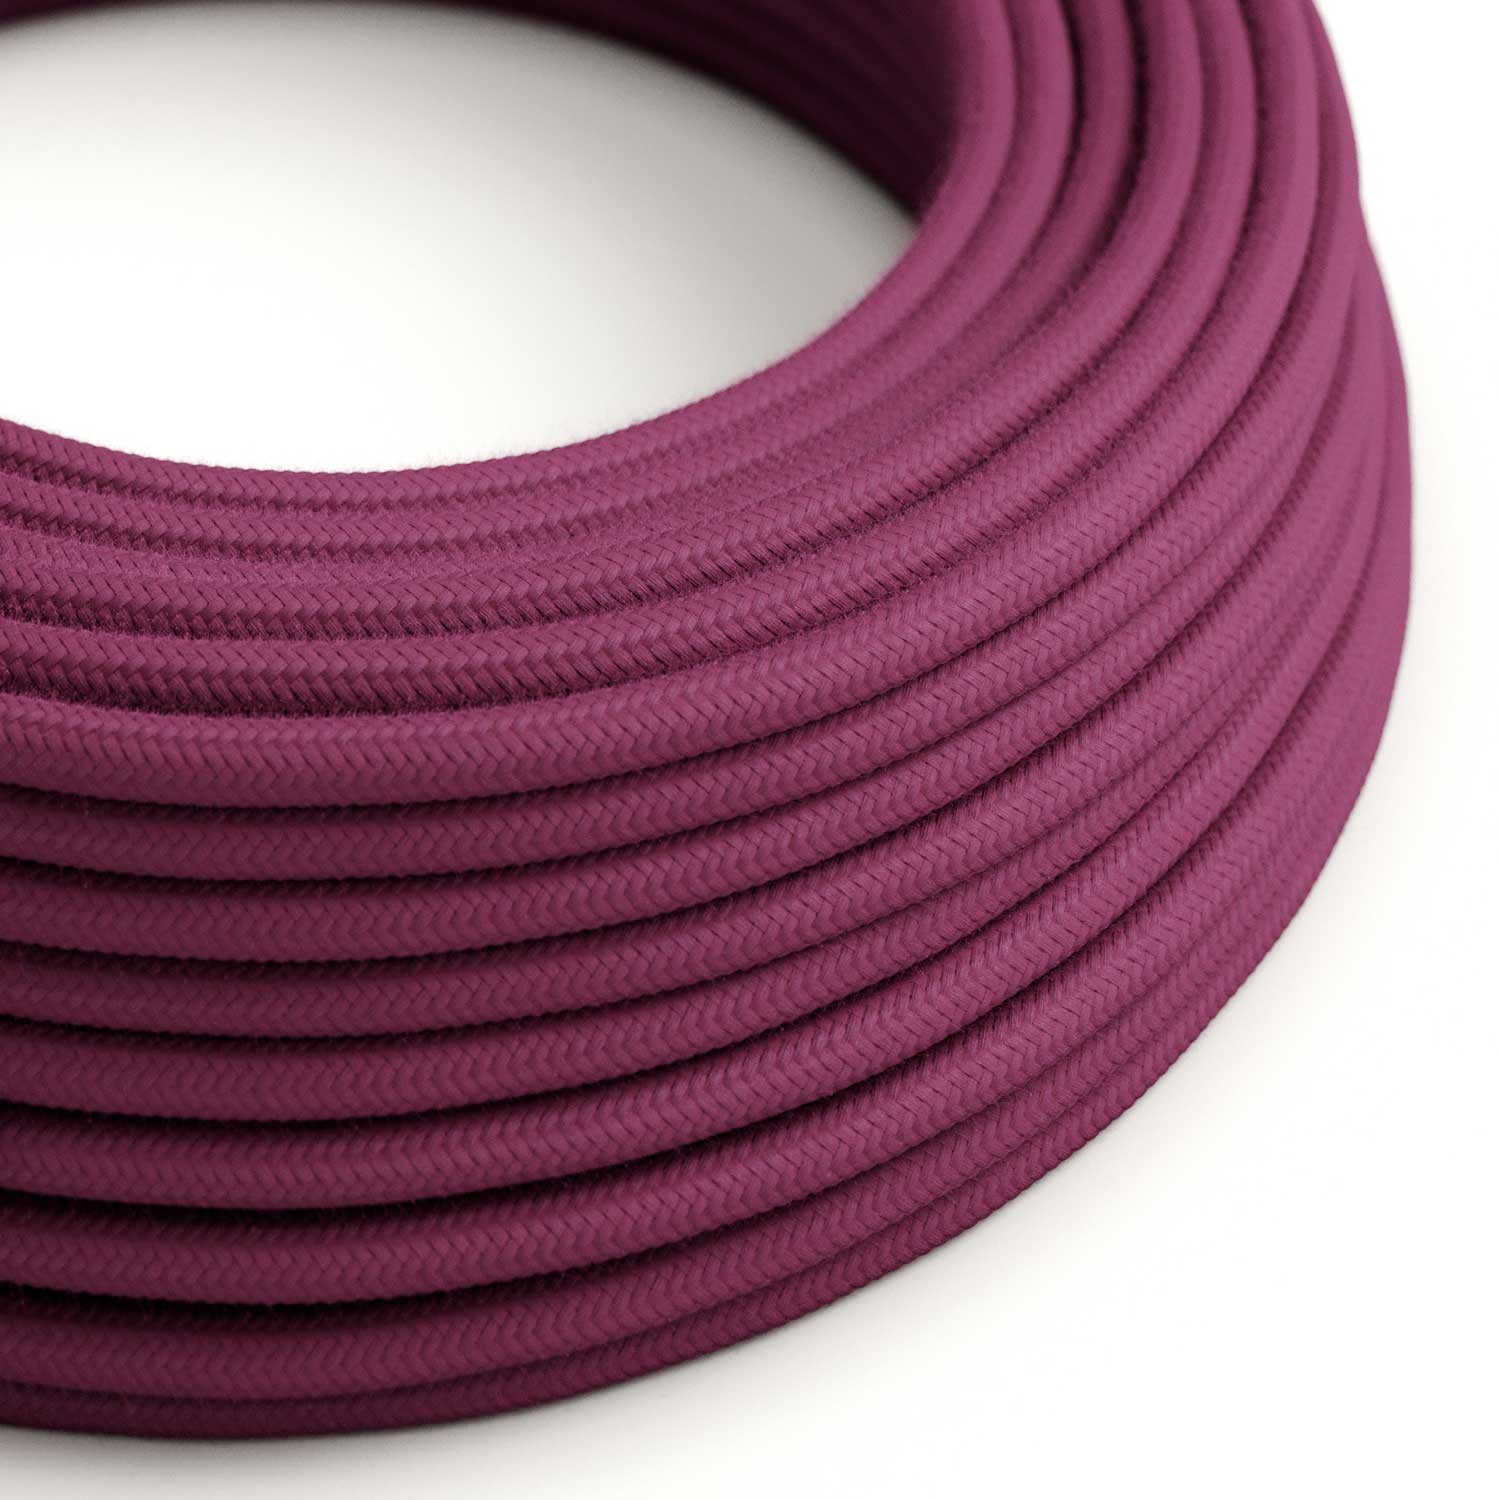 Round Electric Cable covered by Cotton solid colour fabric RC32 Burgundy